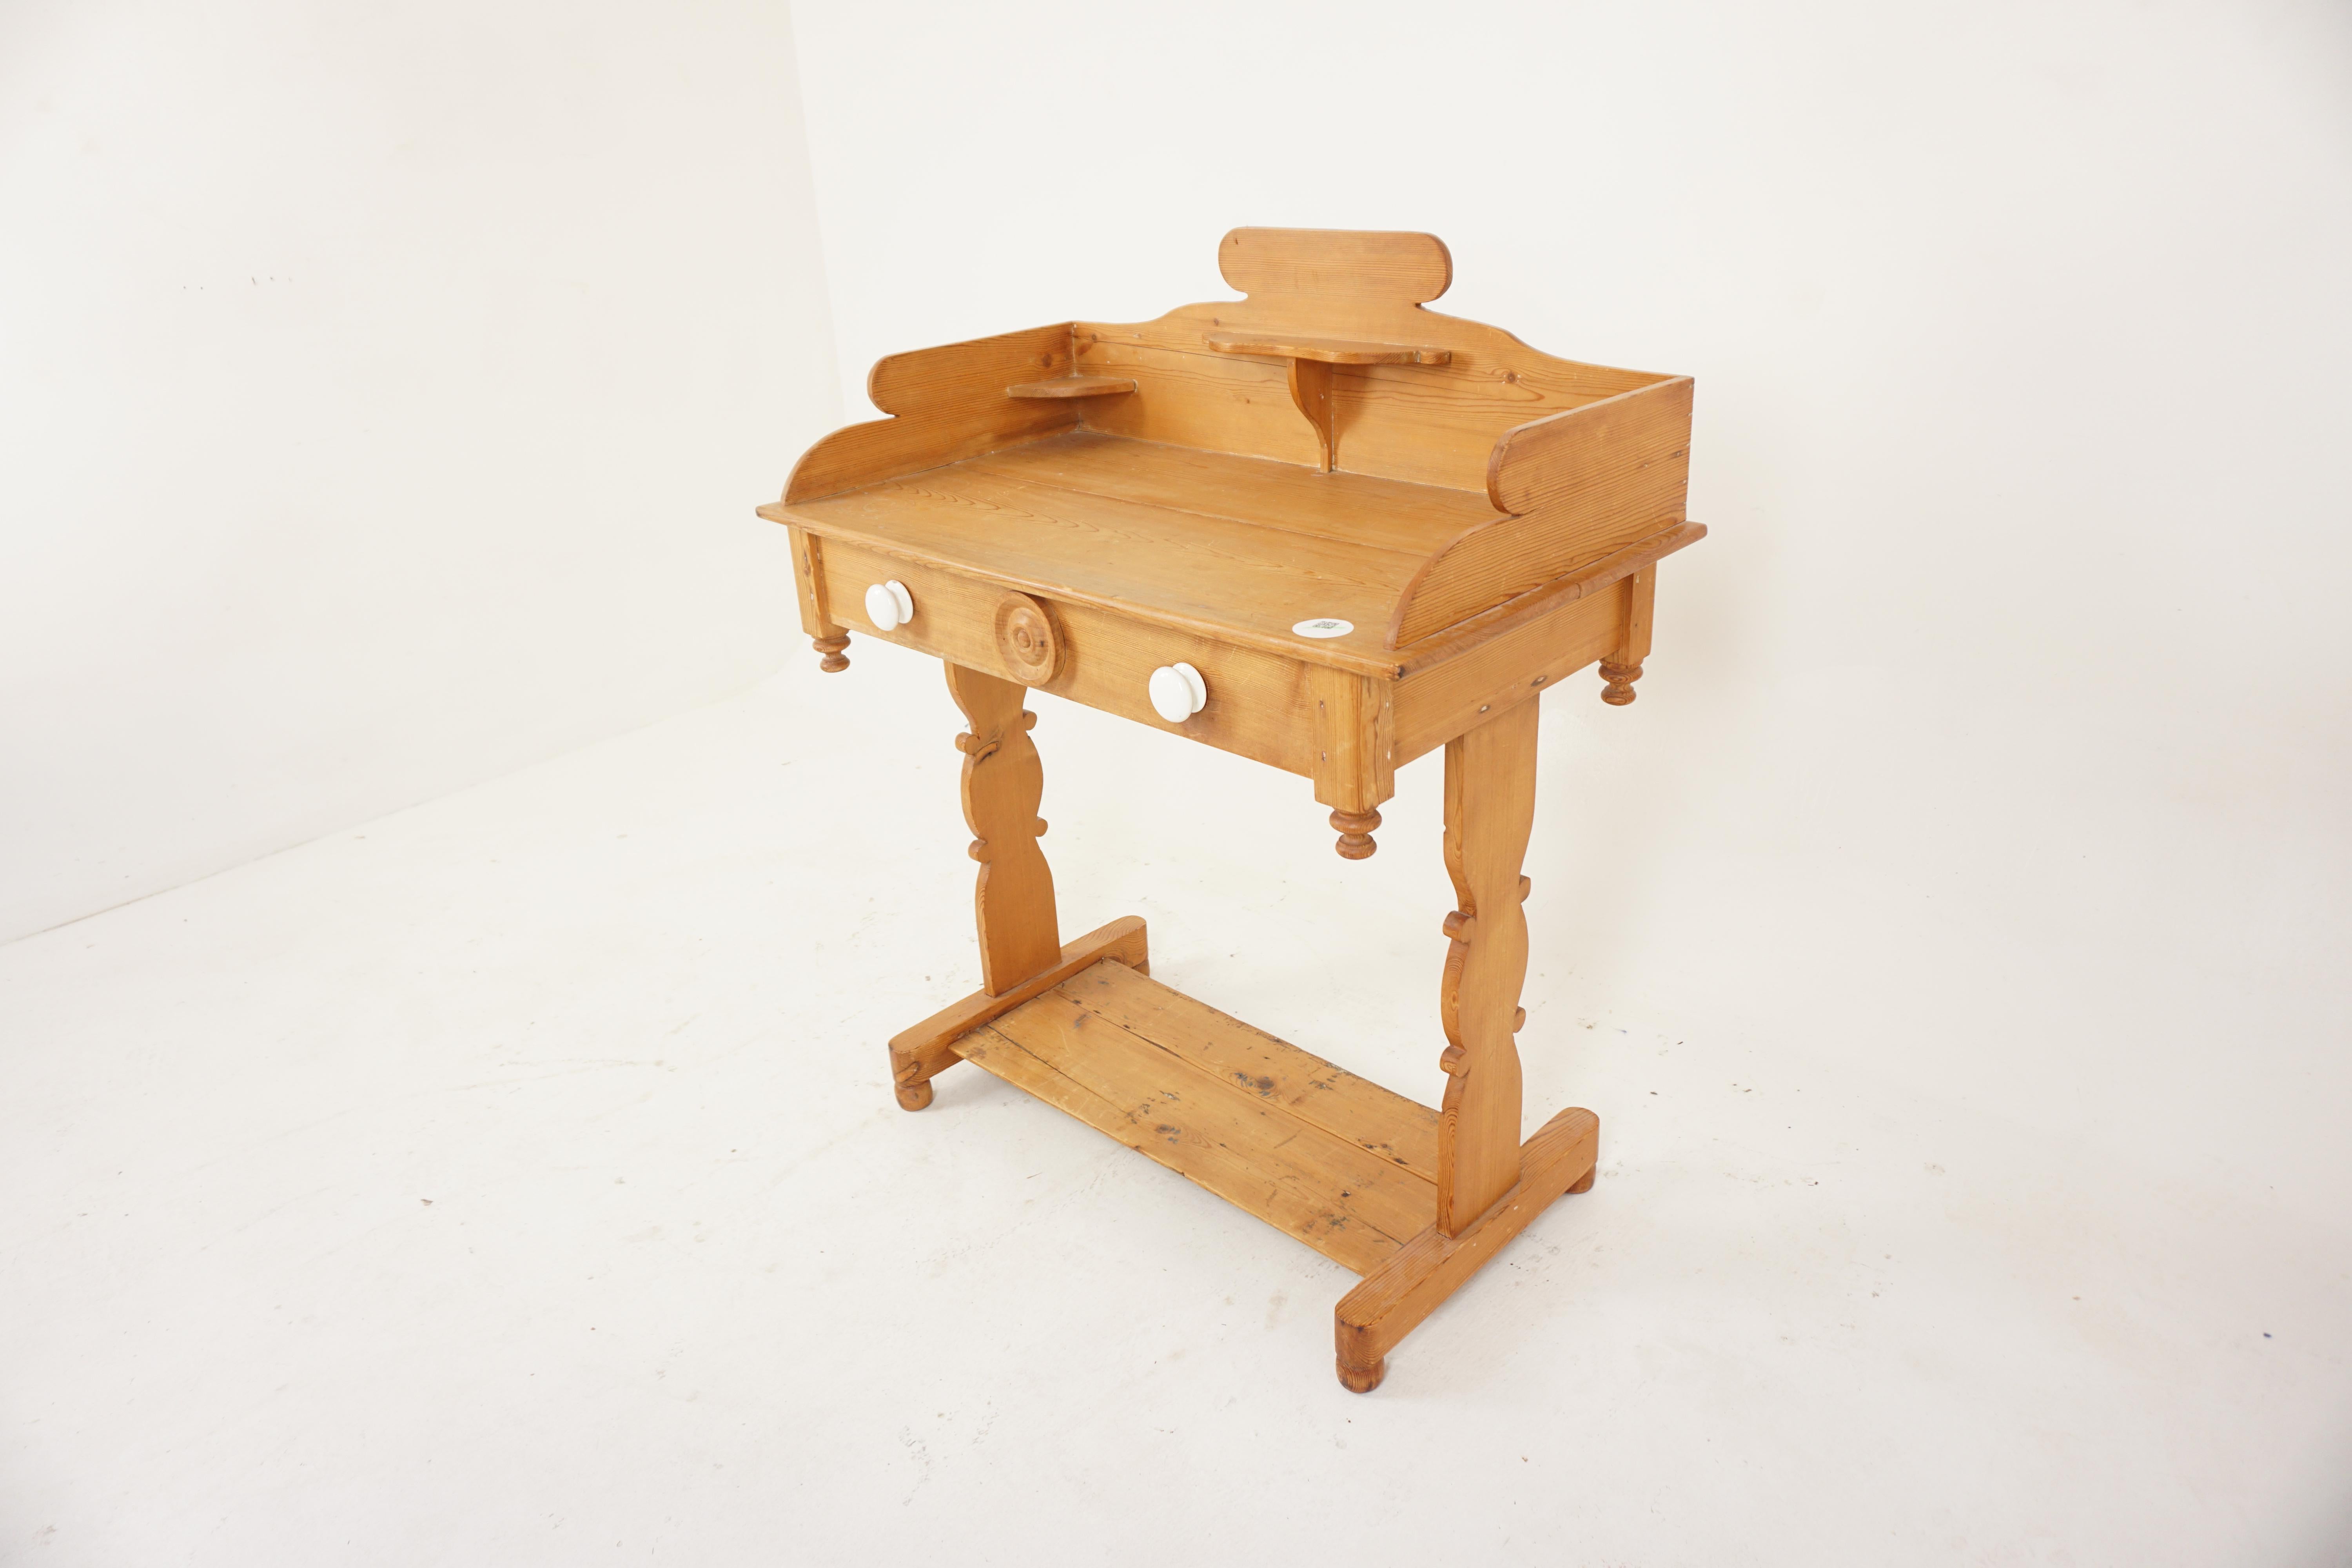 Antique Pine dry sink, washstand, hall table, writing table, Scotland 1880, H682

Scotland 1880
Solid Pine
Original Finish
Shaped pediment to the back
Three quarter gallery on top with three shelves (soap dish and for candlesticks)
False drawer with